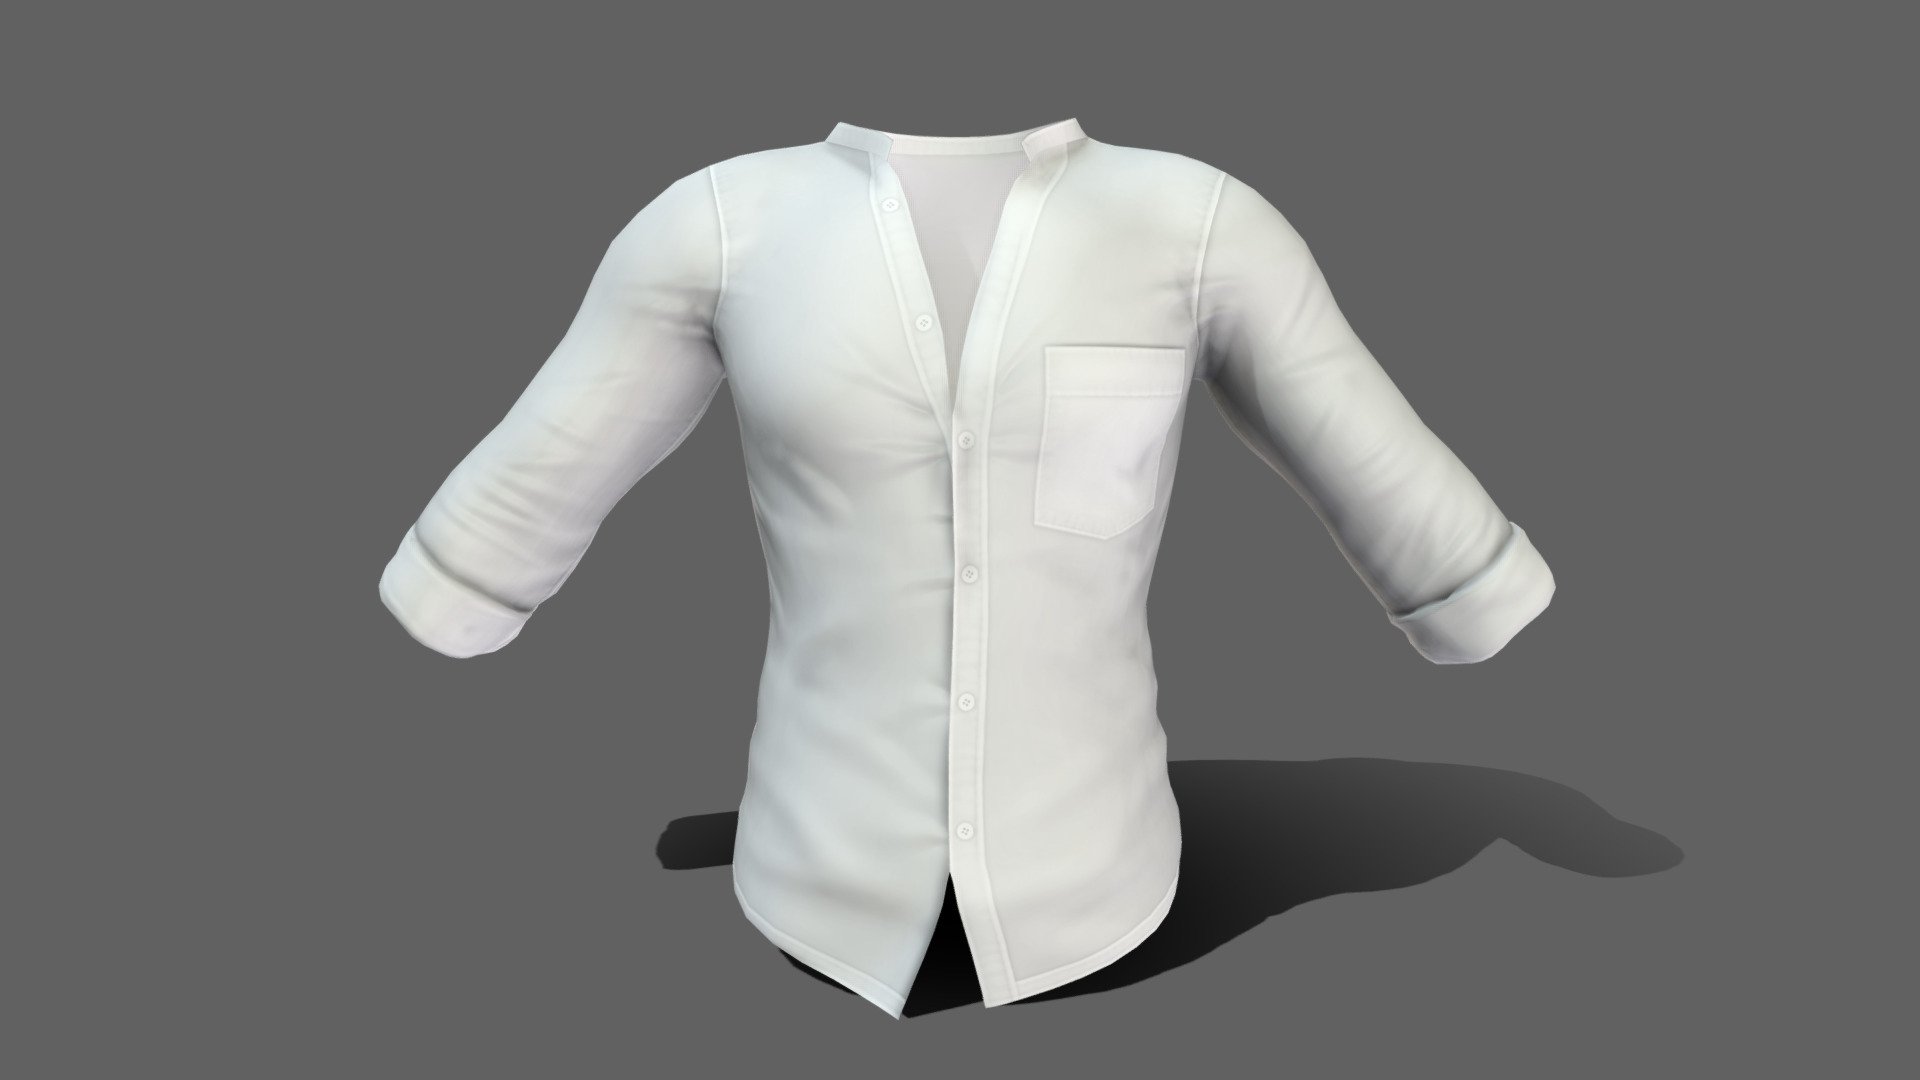 Can fit to any character

Ready for games

Clean topology

No overlapping unwrapped UVs

High quality realistic textues

FBX, OBJ, gITF, USDZ, Ma, PSD (request other formats)

PBR or Classic

Please ask for any other questions

Type     user:3dia &ldquo;search term